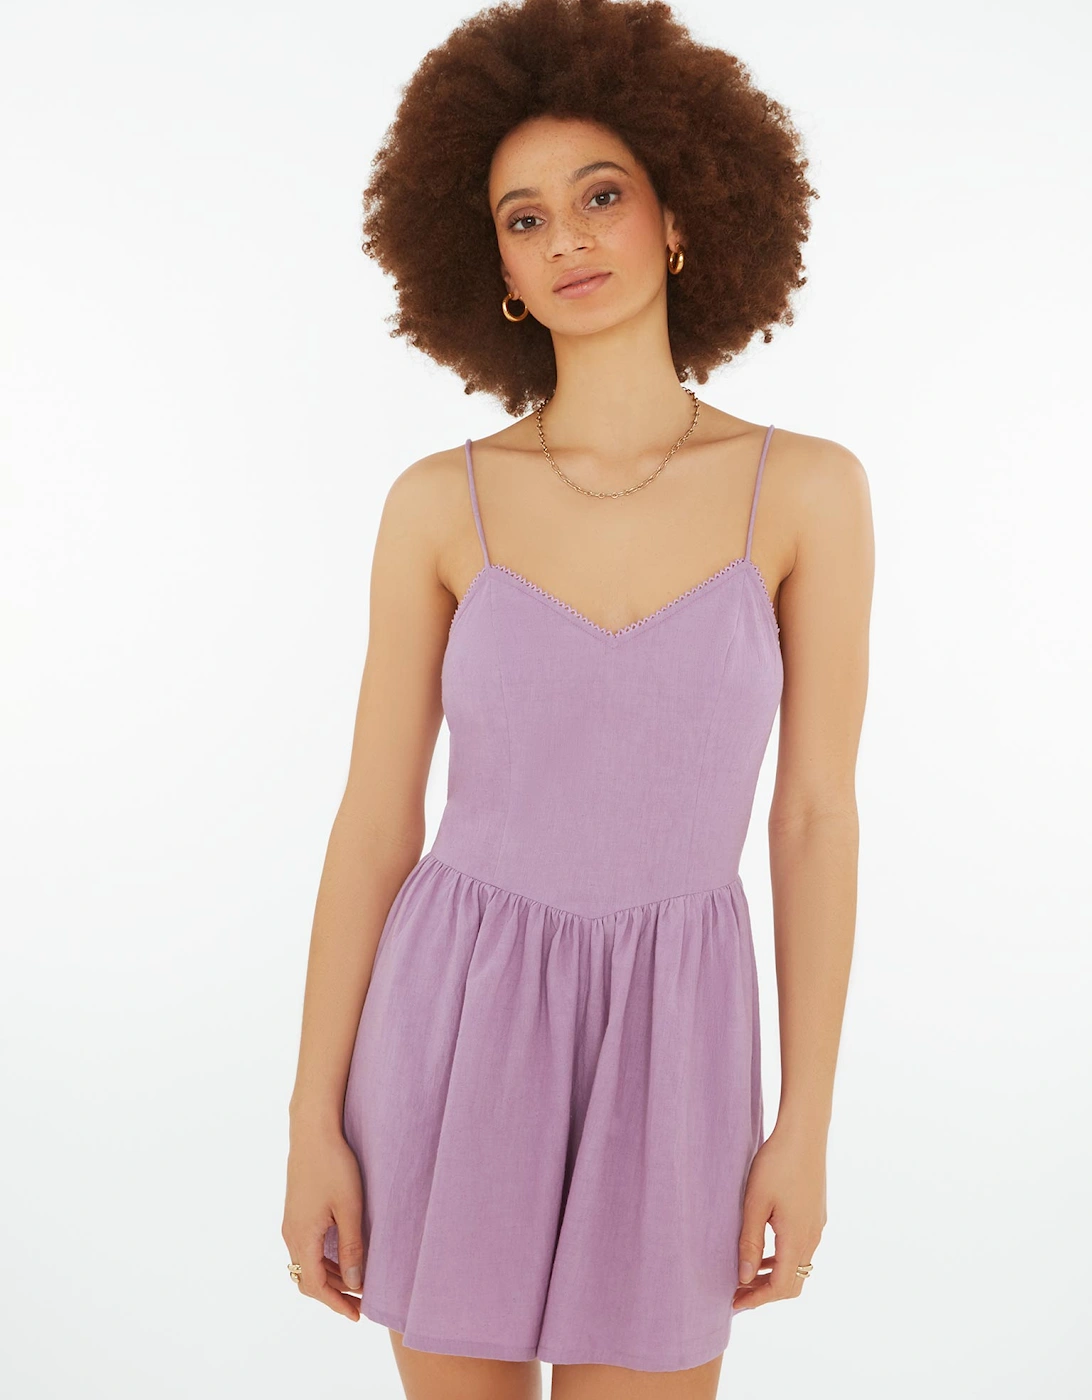 Dove Playsuit in Lilac